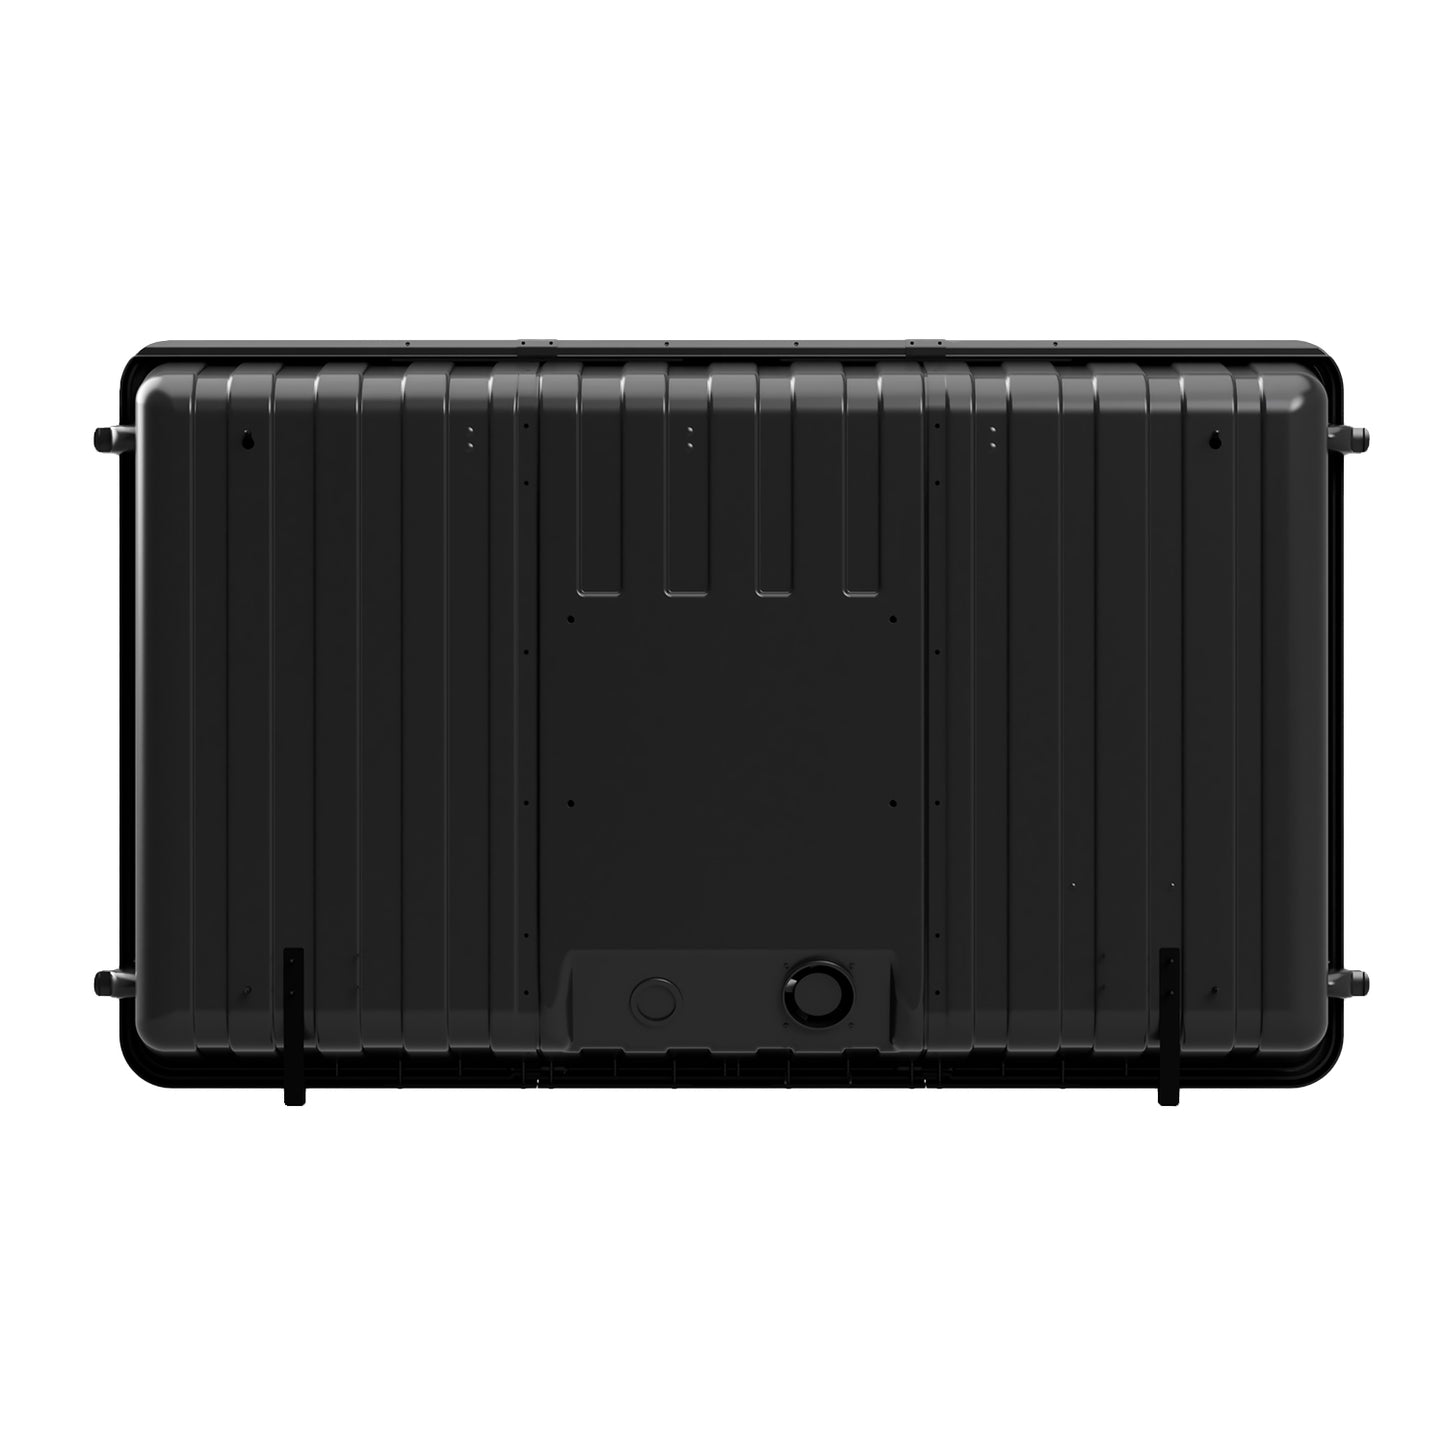 Storm Shell Deluxe Weatherproof 65” Outdoor TV Enclosure, Cooling fan and power strip included. Back view